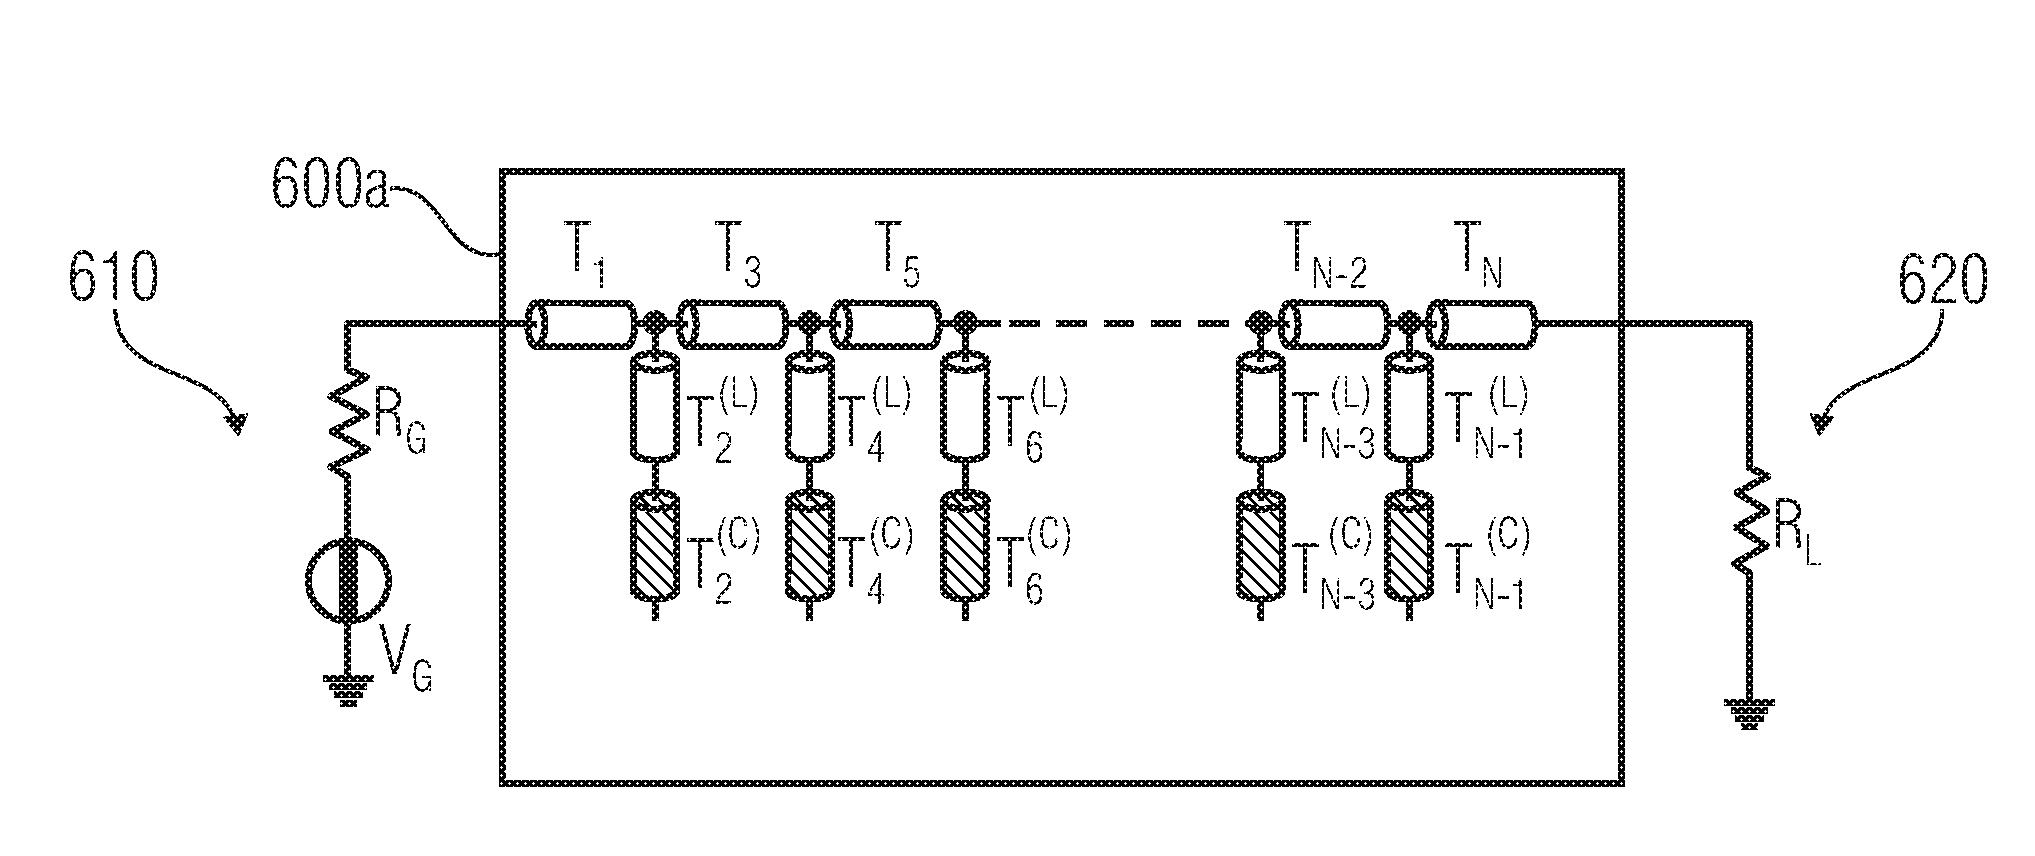 Electrical double filter structure